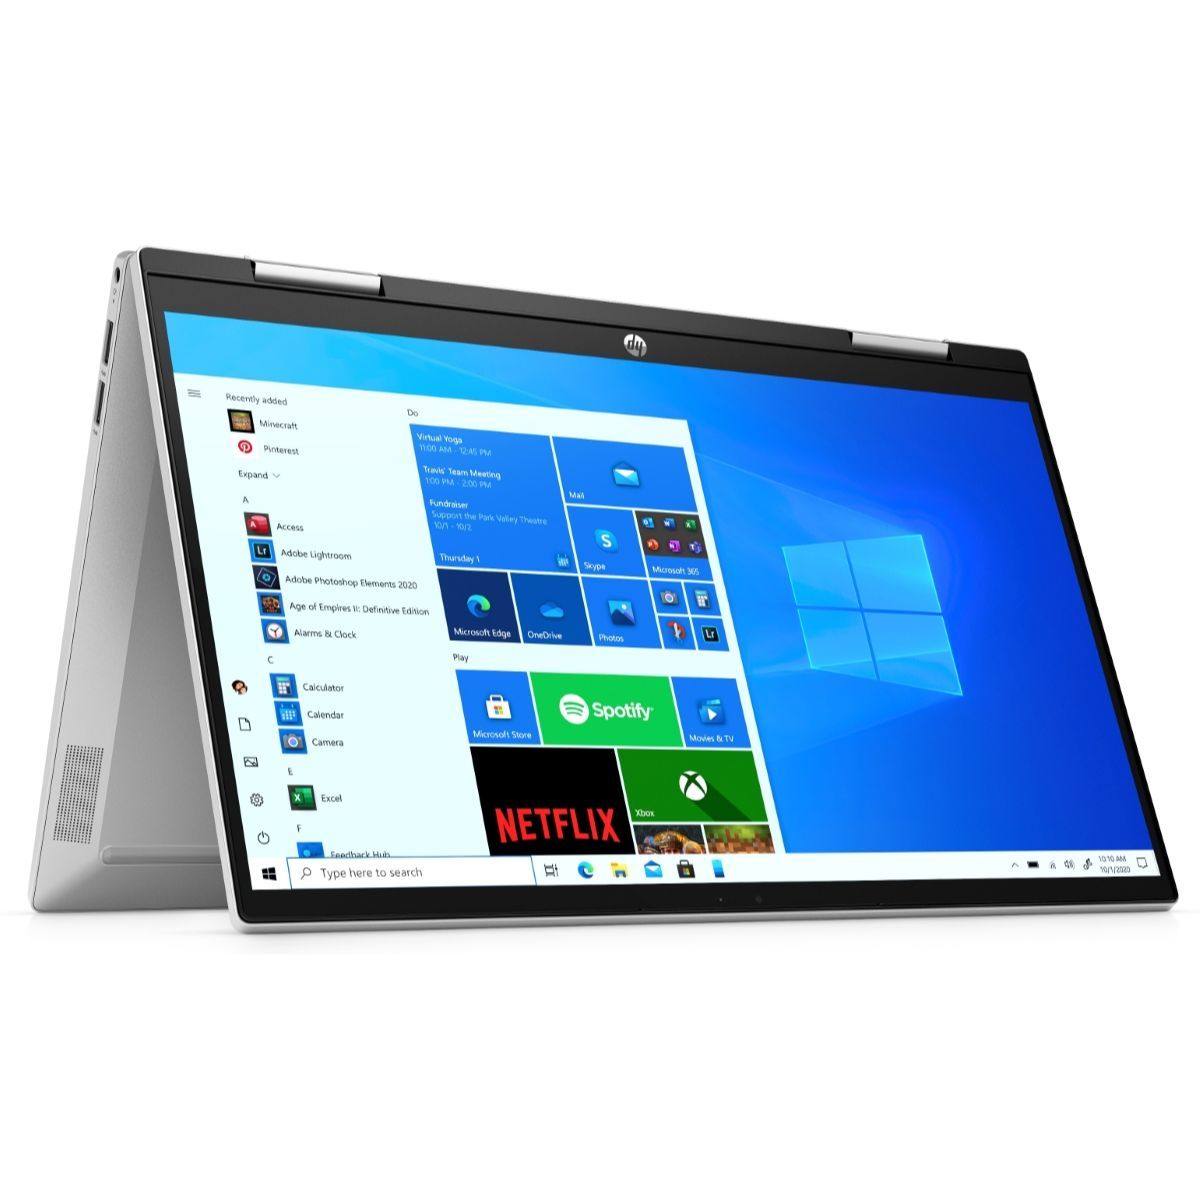 HP 2-in-1 Pavilion x360 14-dy0505sa 14" Touch Intel Core i3 4GB RAM 256GB SSD